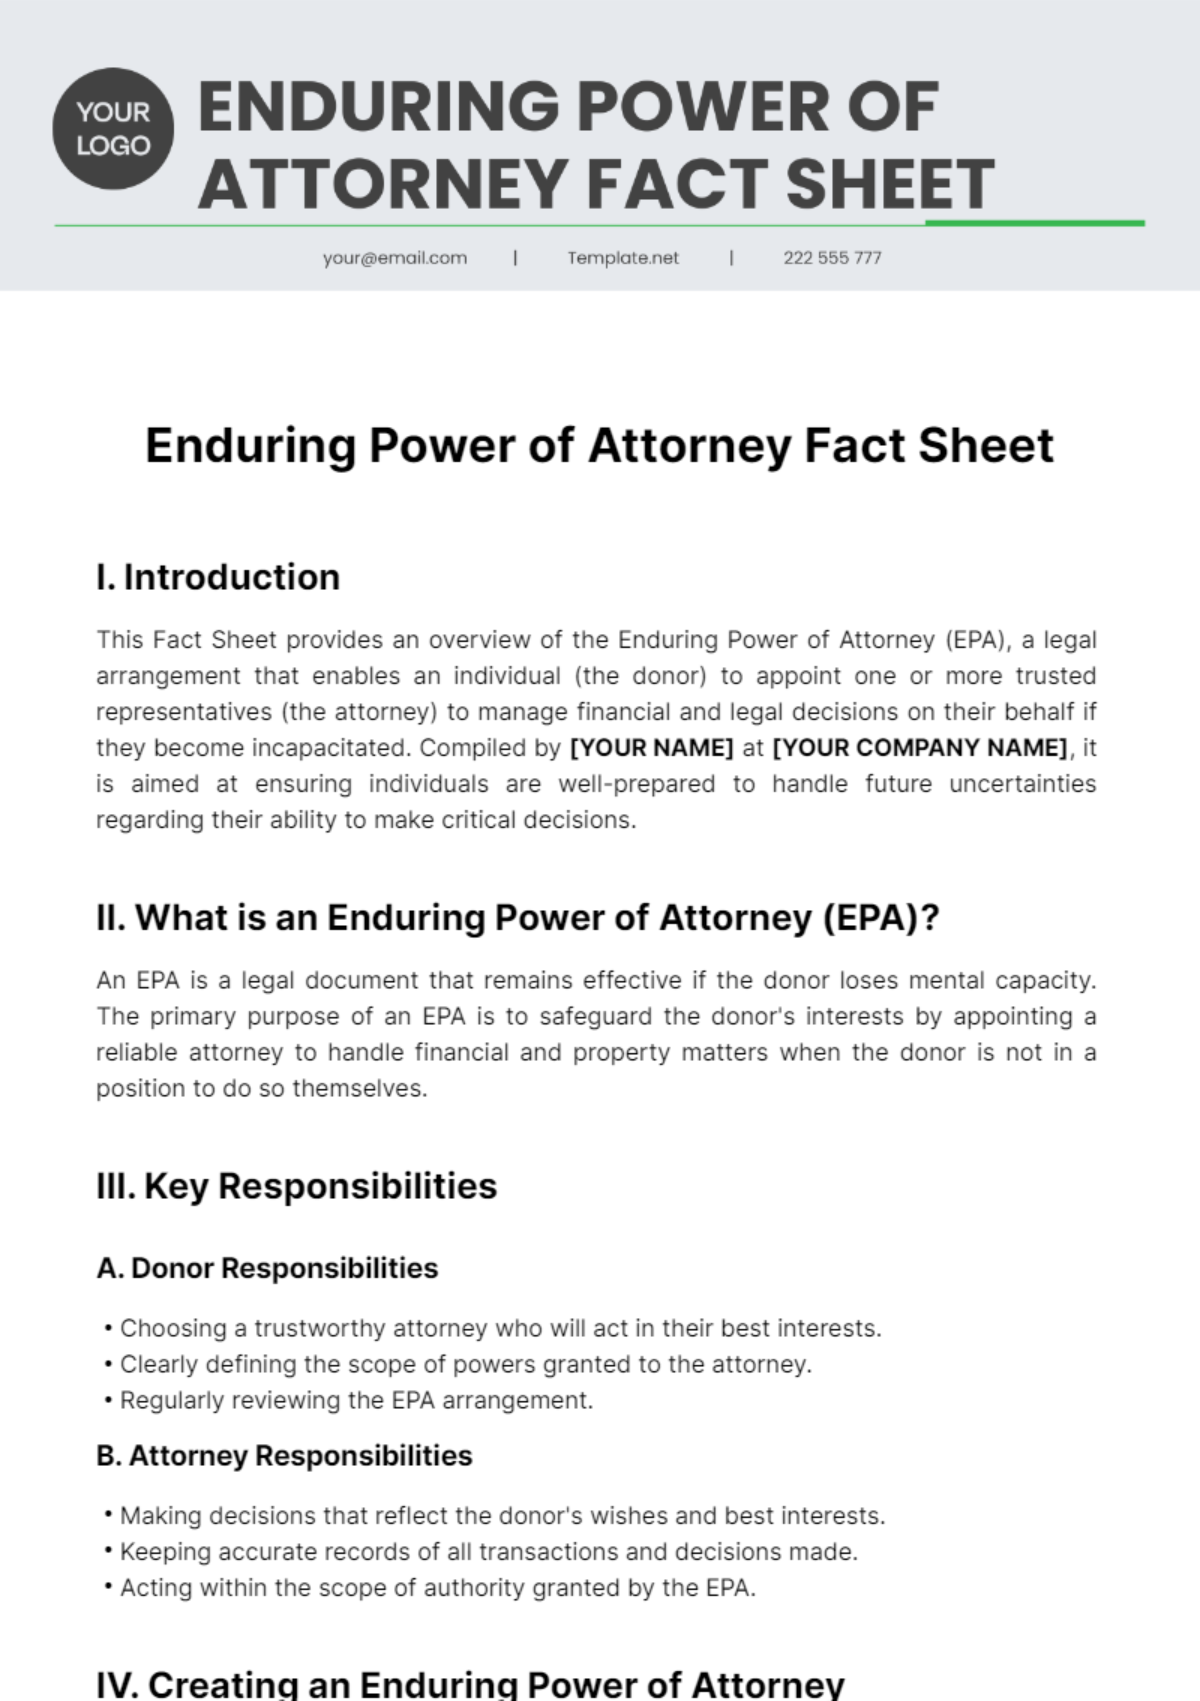 Enduring Power Of Attorney Fact Sheet Template